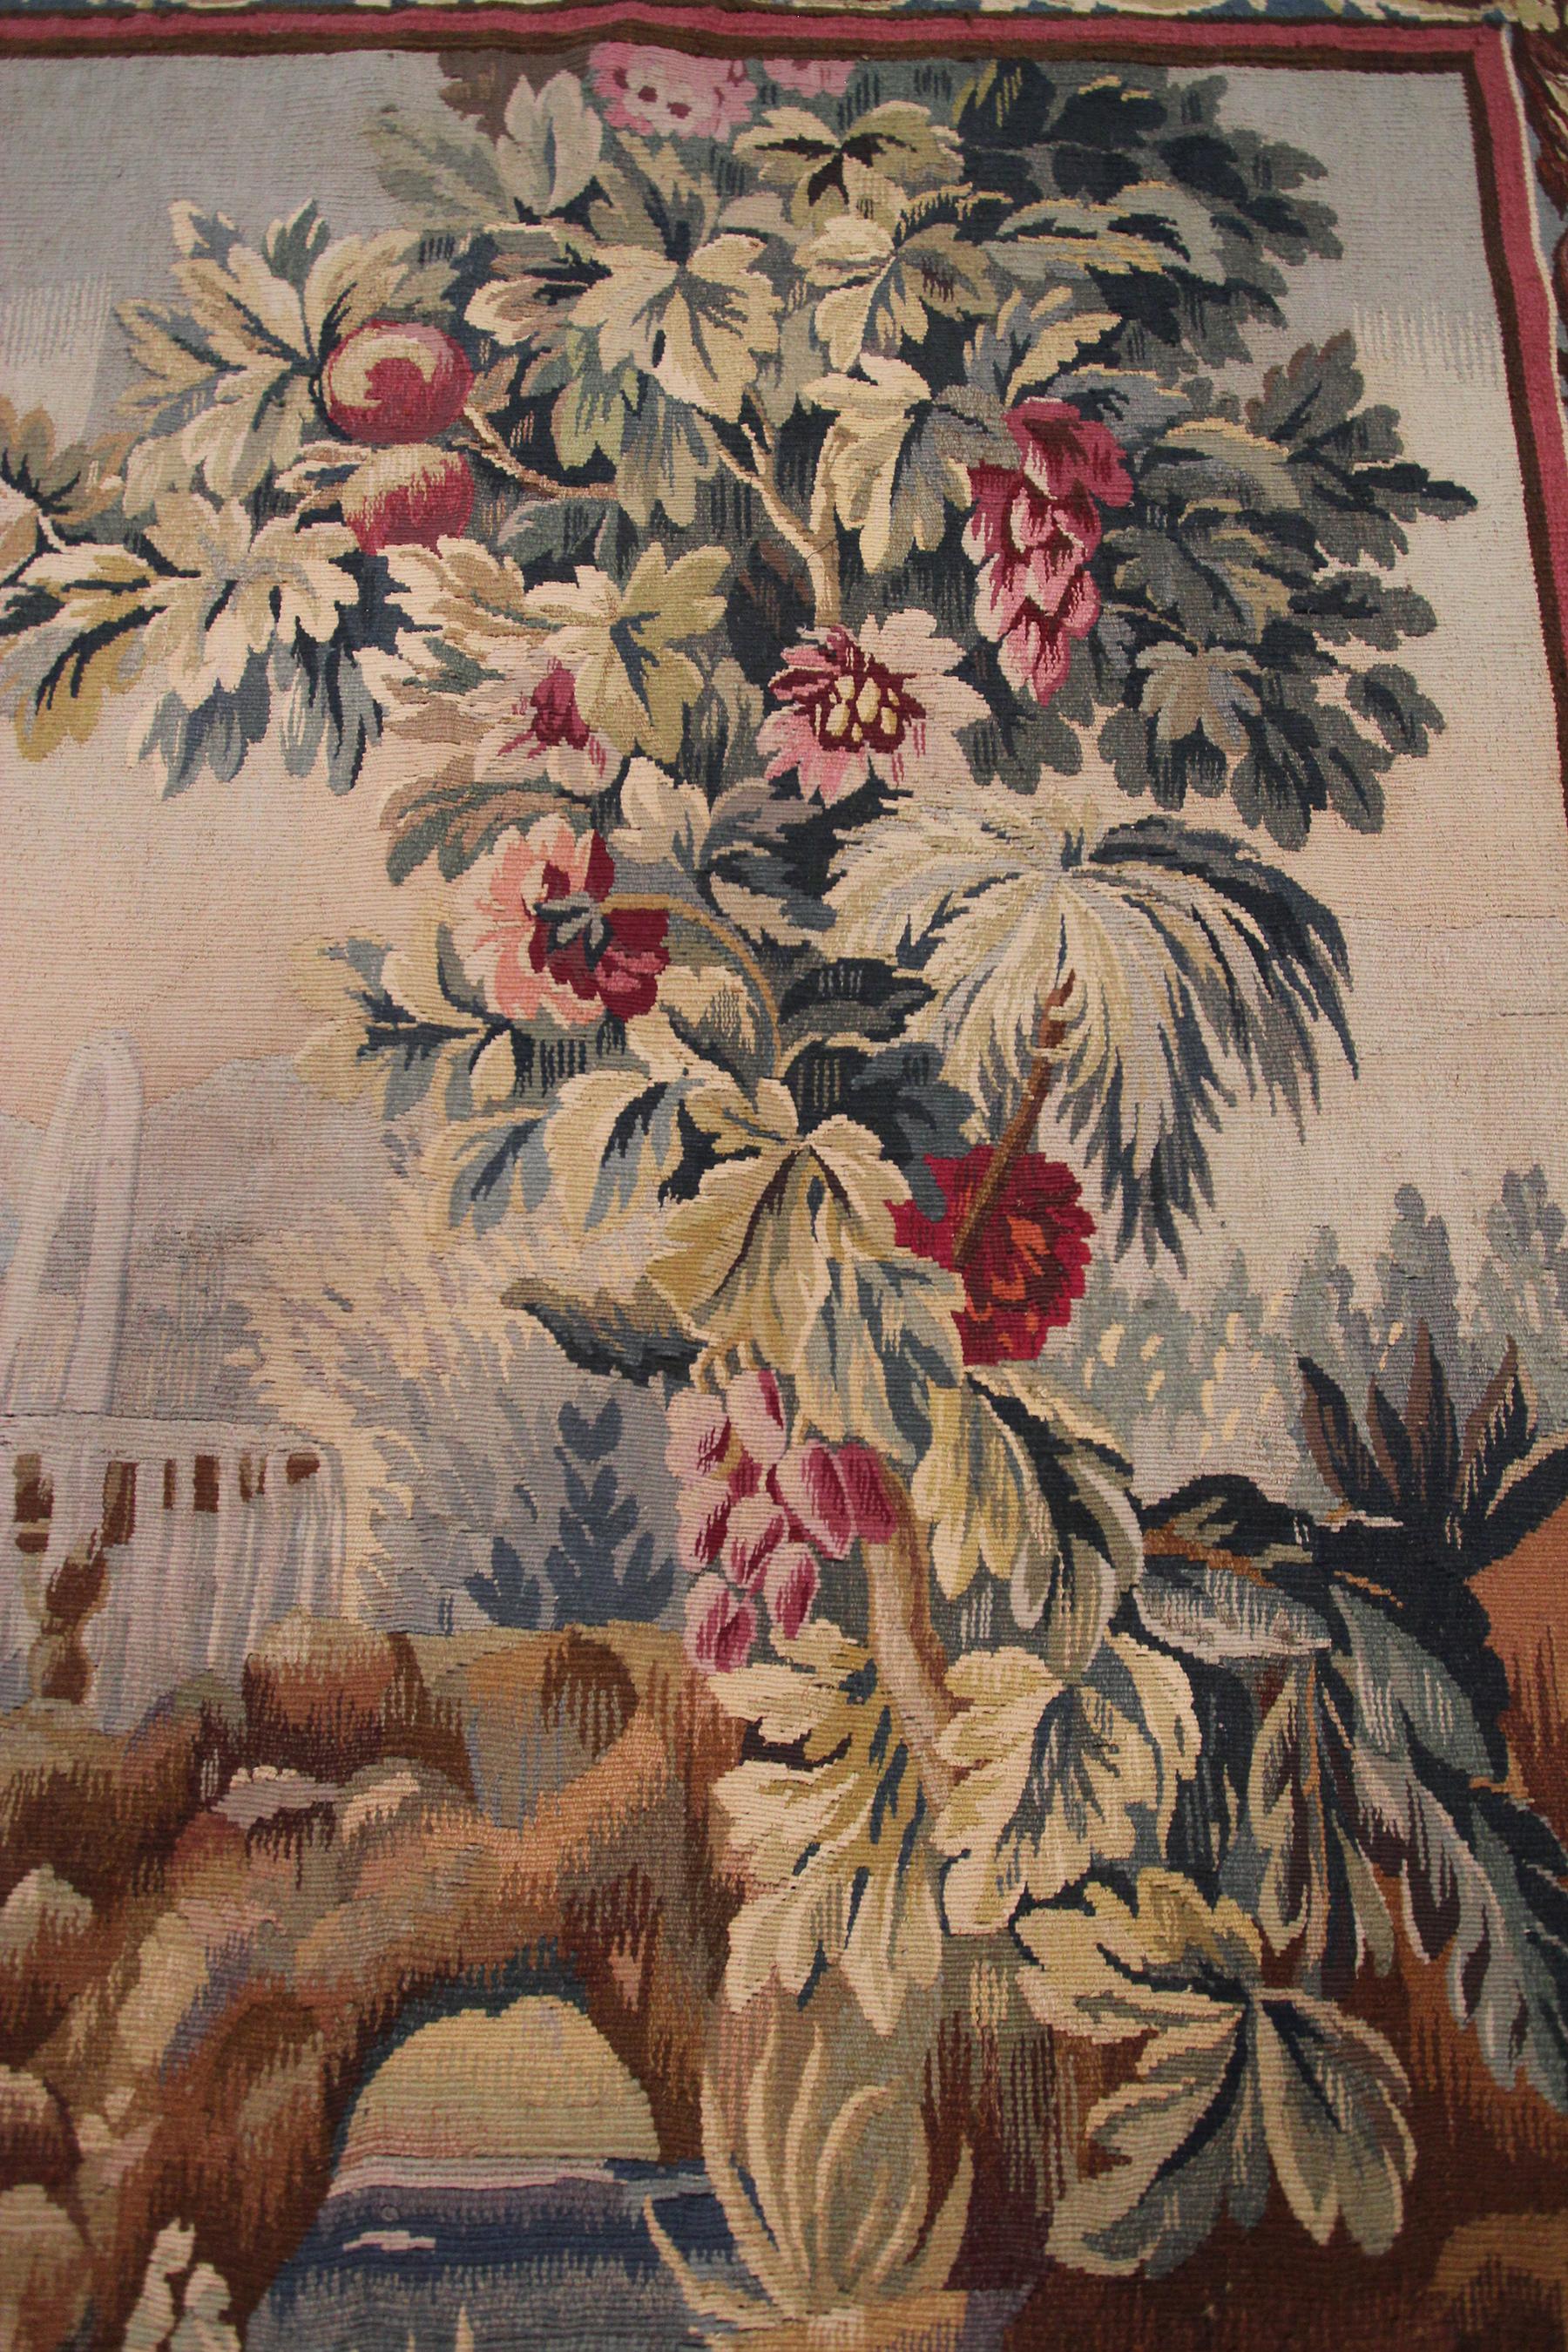 Hand-Woven Antique Tapestry Verdure Tapestry Large Handmade French Tapestry, 1920 For Sale